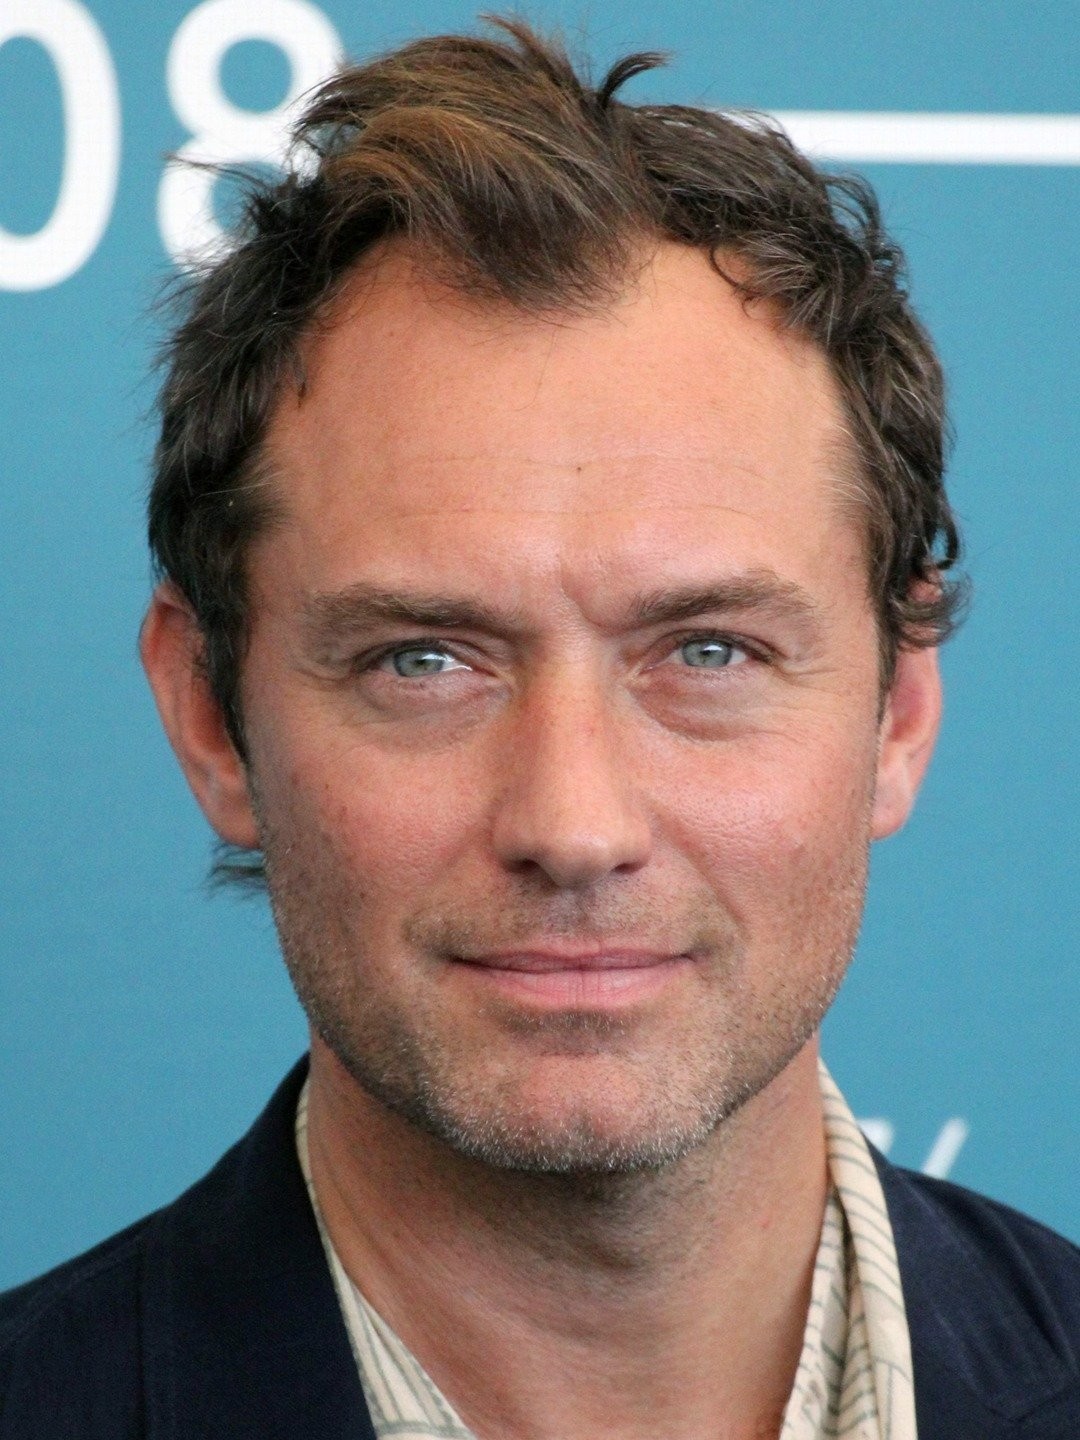 jude law named after